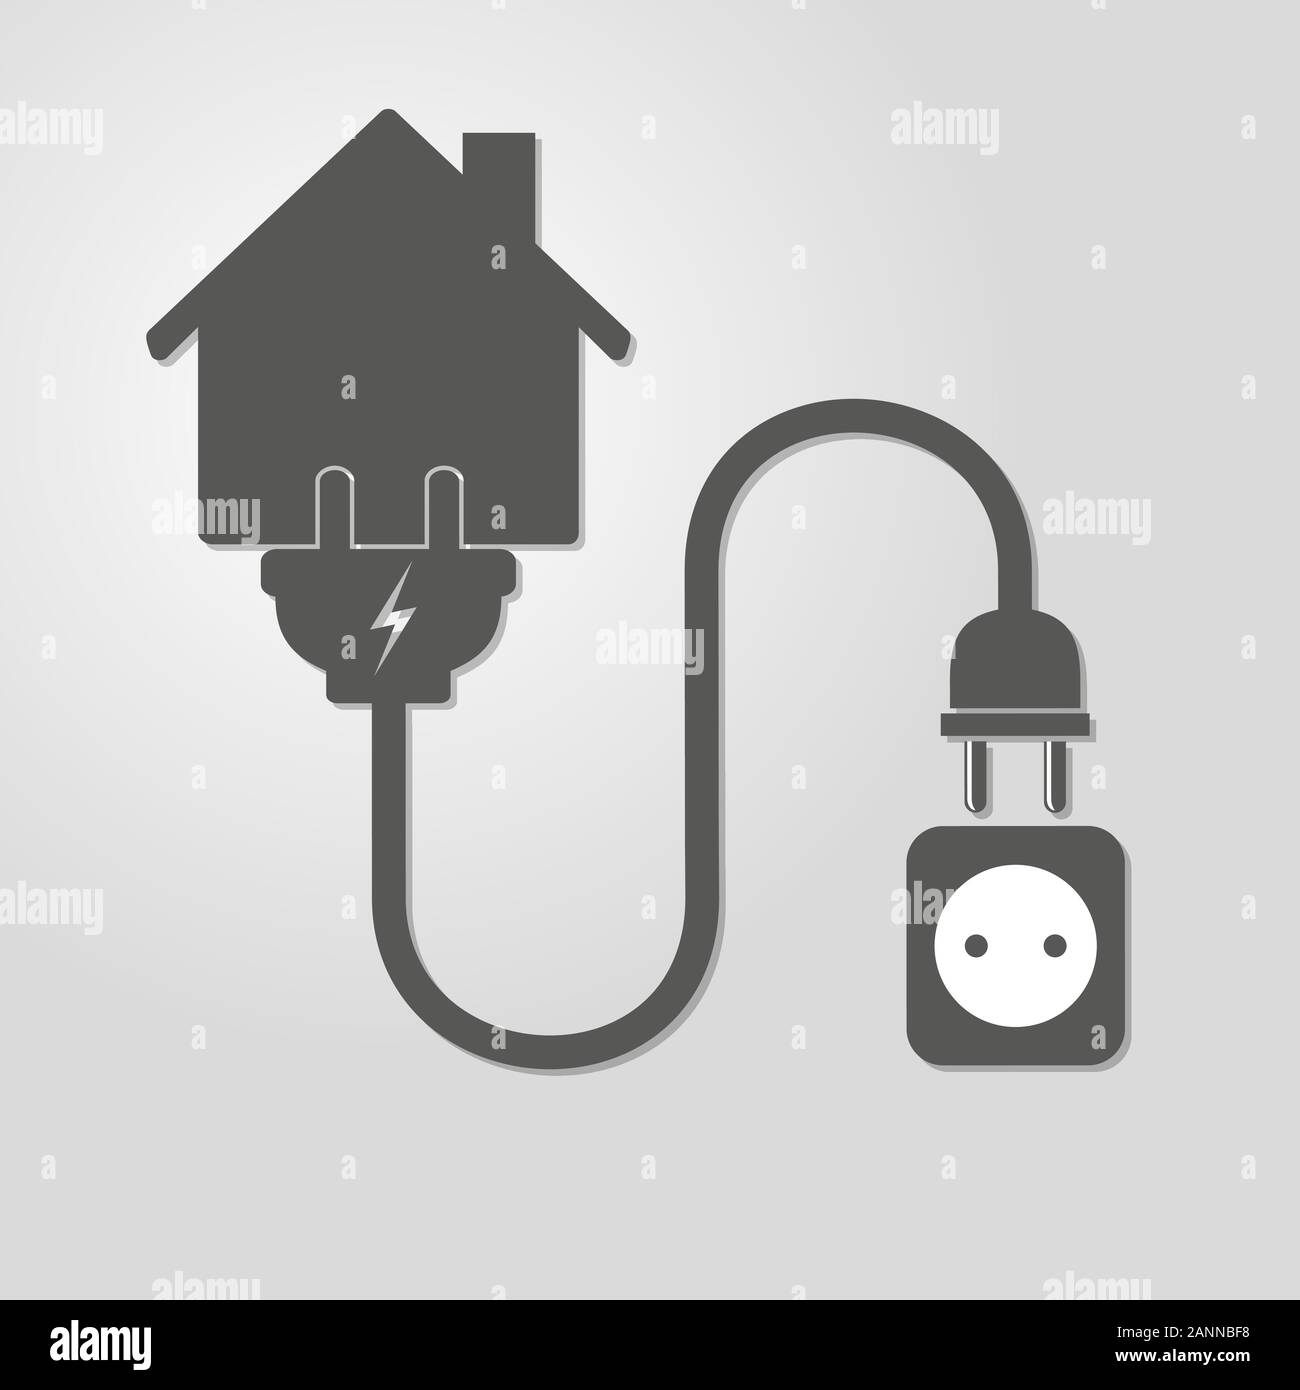 Silhouette of house with wire plug and socket - vector illustration. Simple icon with house, socket and wire plug on light background. Concept of conn Stock Vector